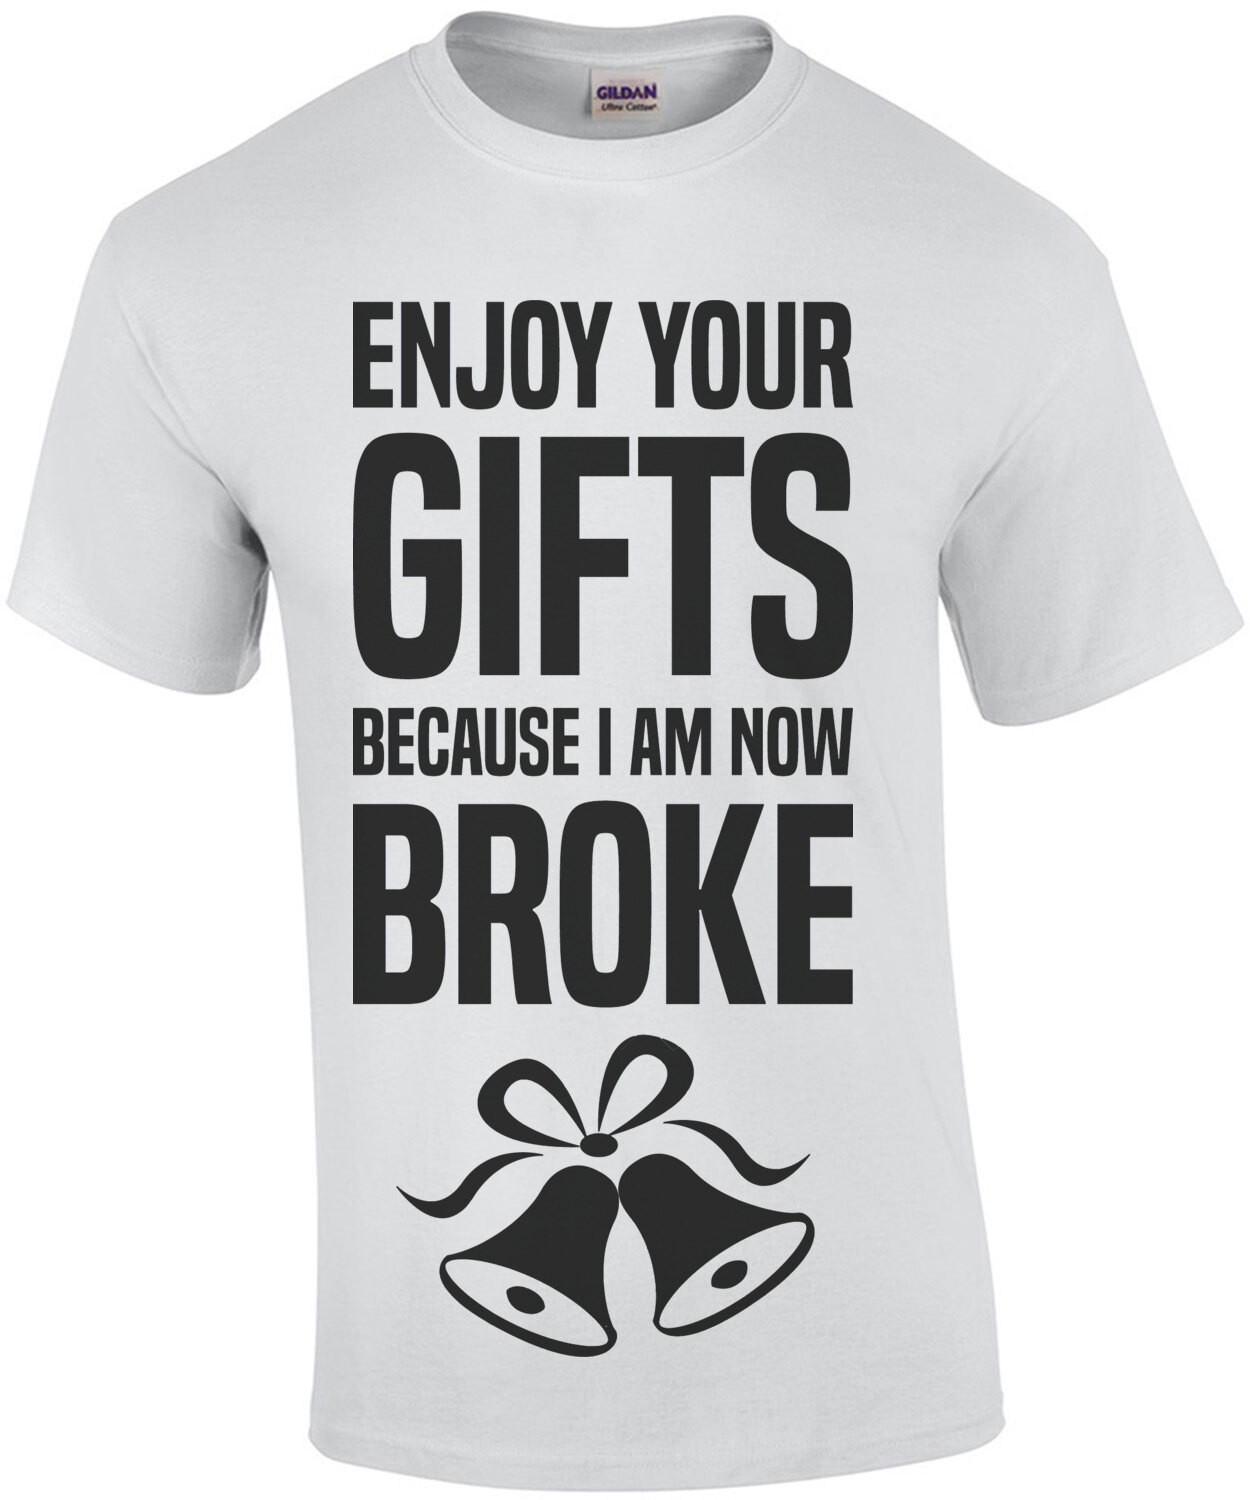 Enjoy your gifts because I am now broke - Funny Christmas T-Shirt